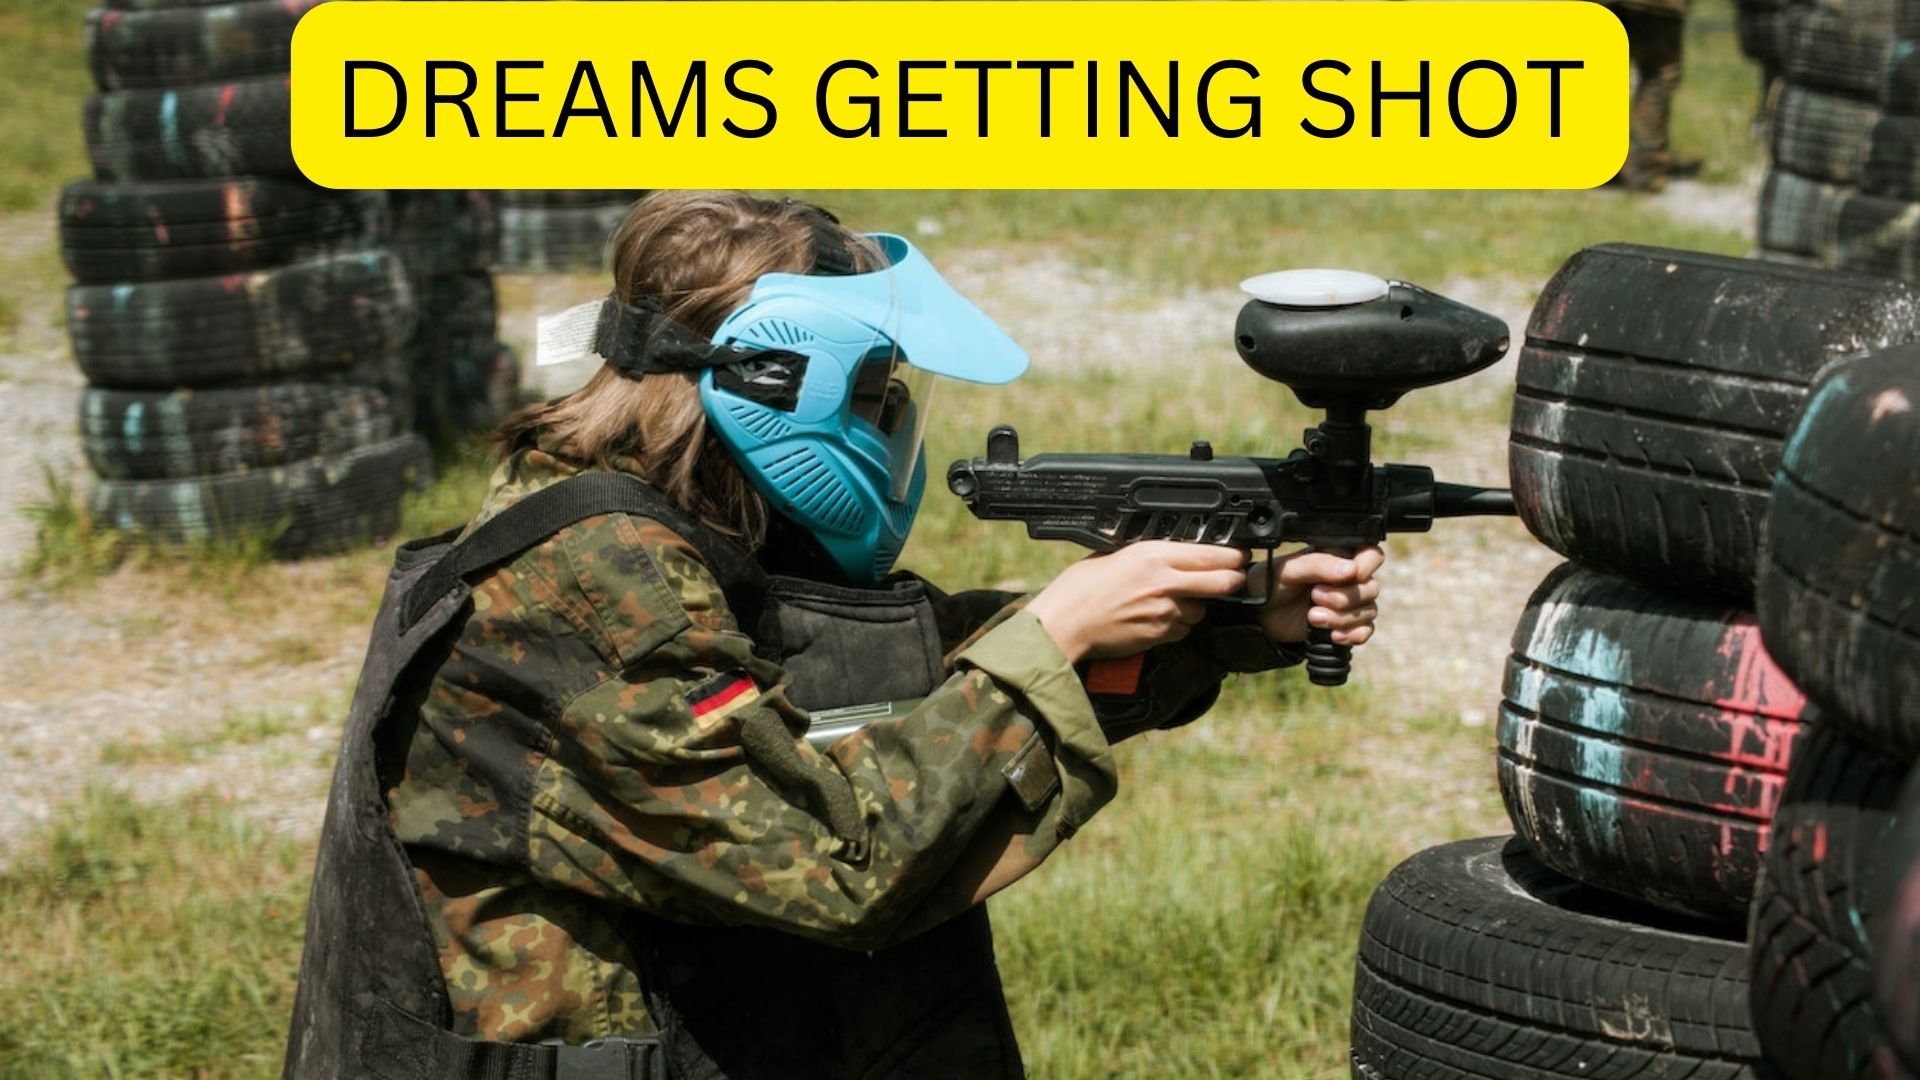 Dreams Getting Shot - A Struggle In Your Career